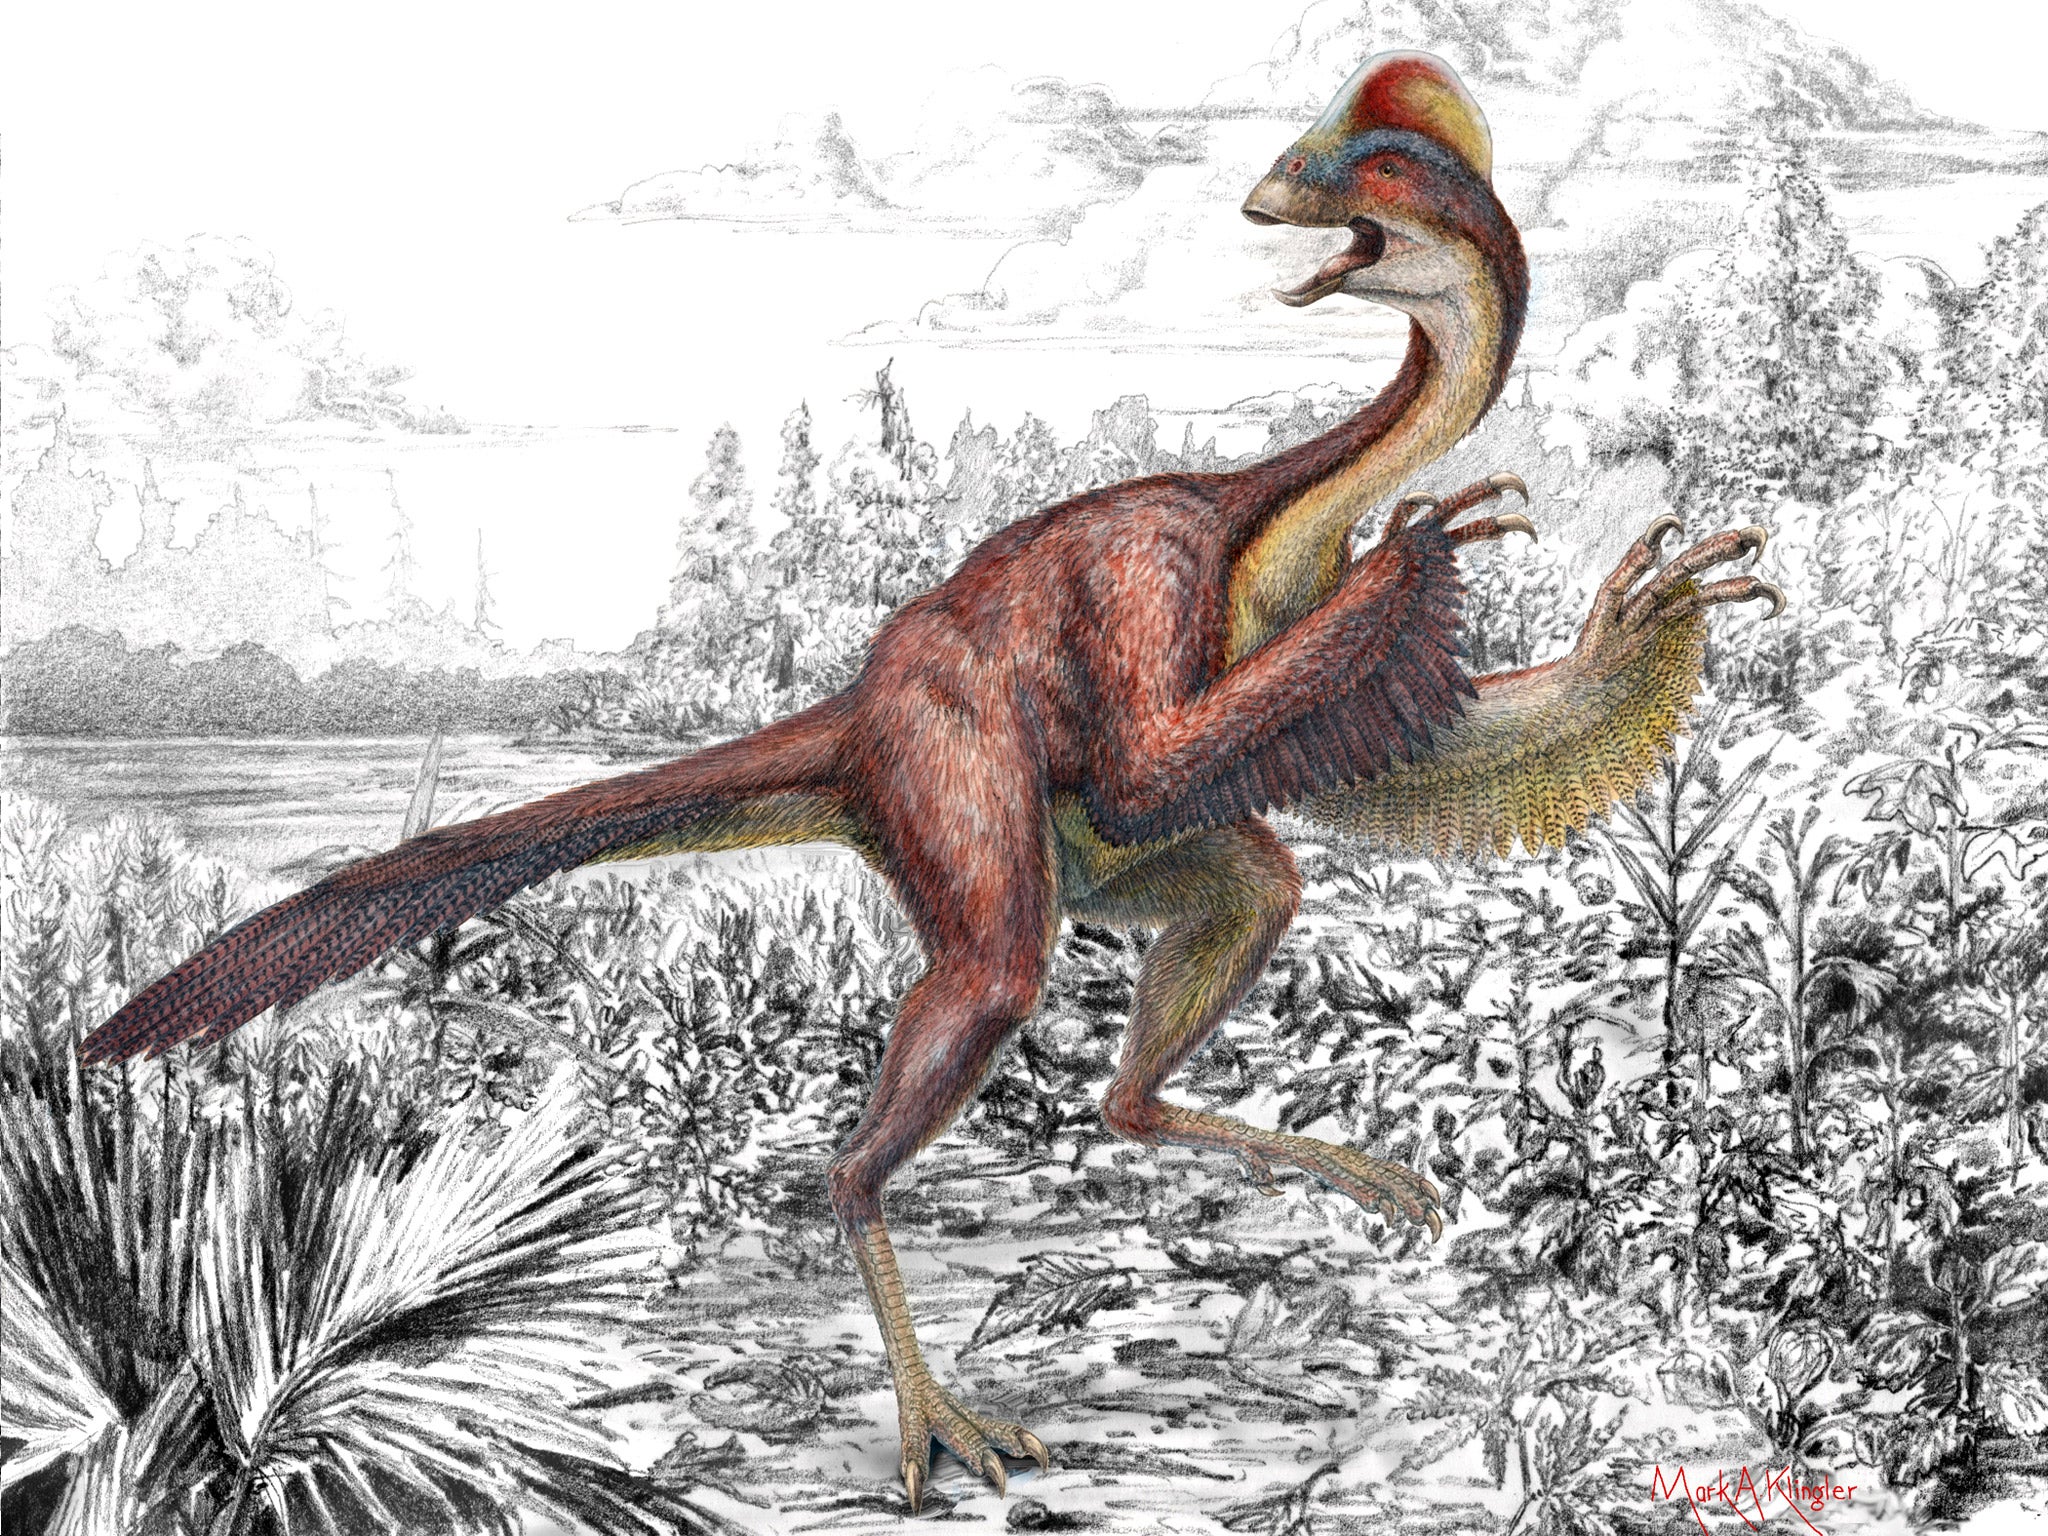 The bird-like ‘Anzu wyliei’ is the largest of the oviraptorosaur group of dinosaurs to be found in North America